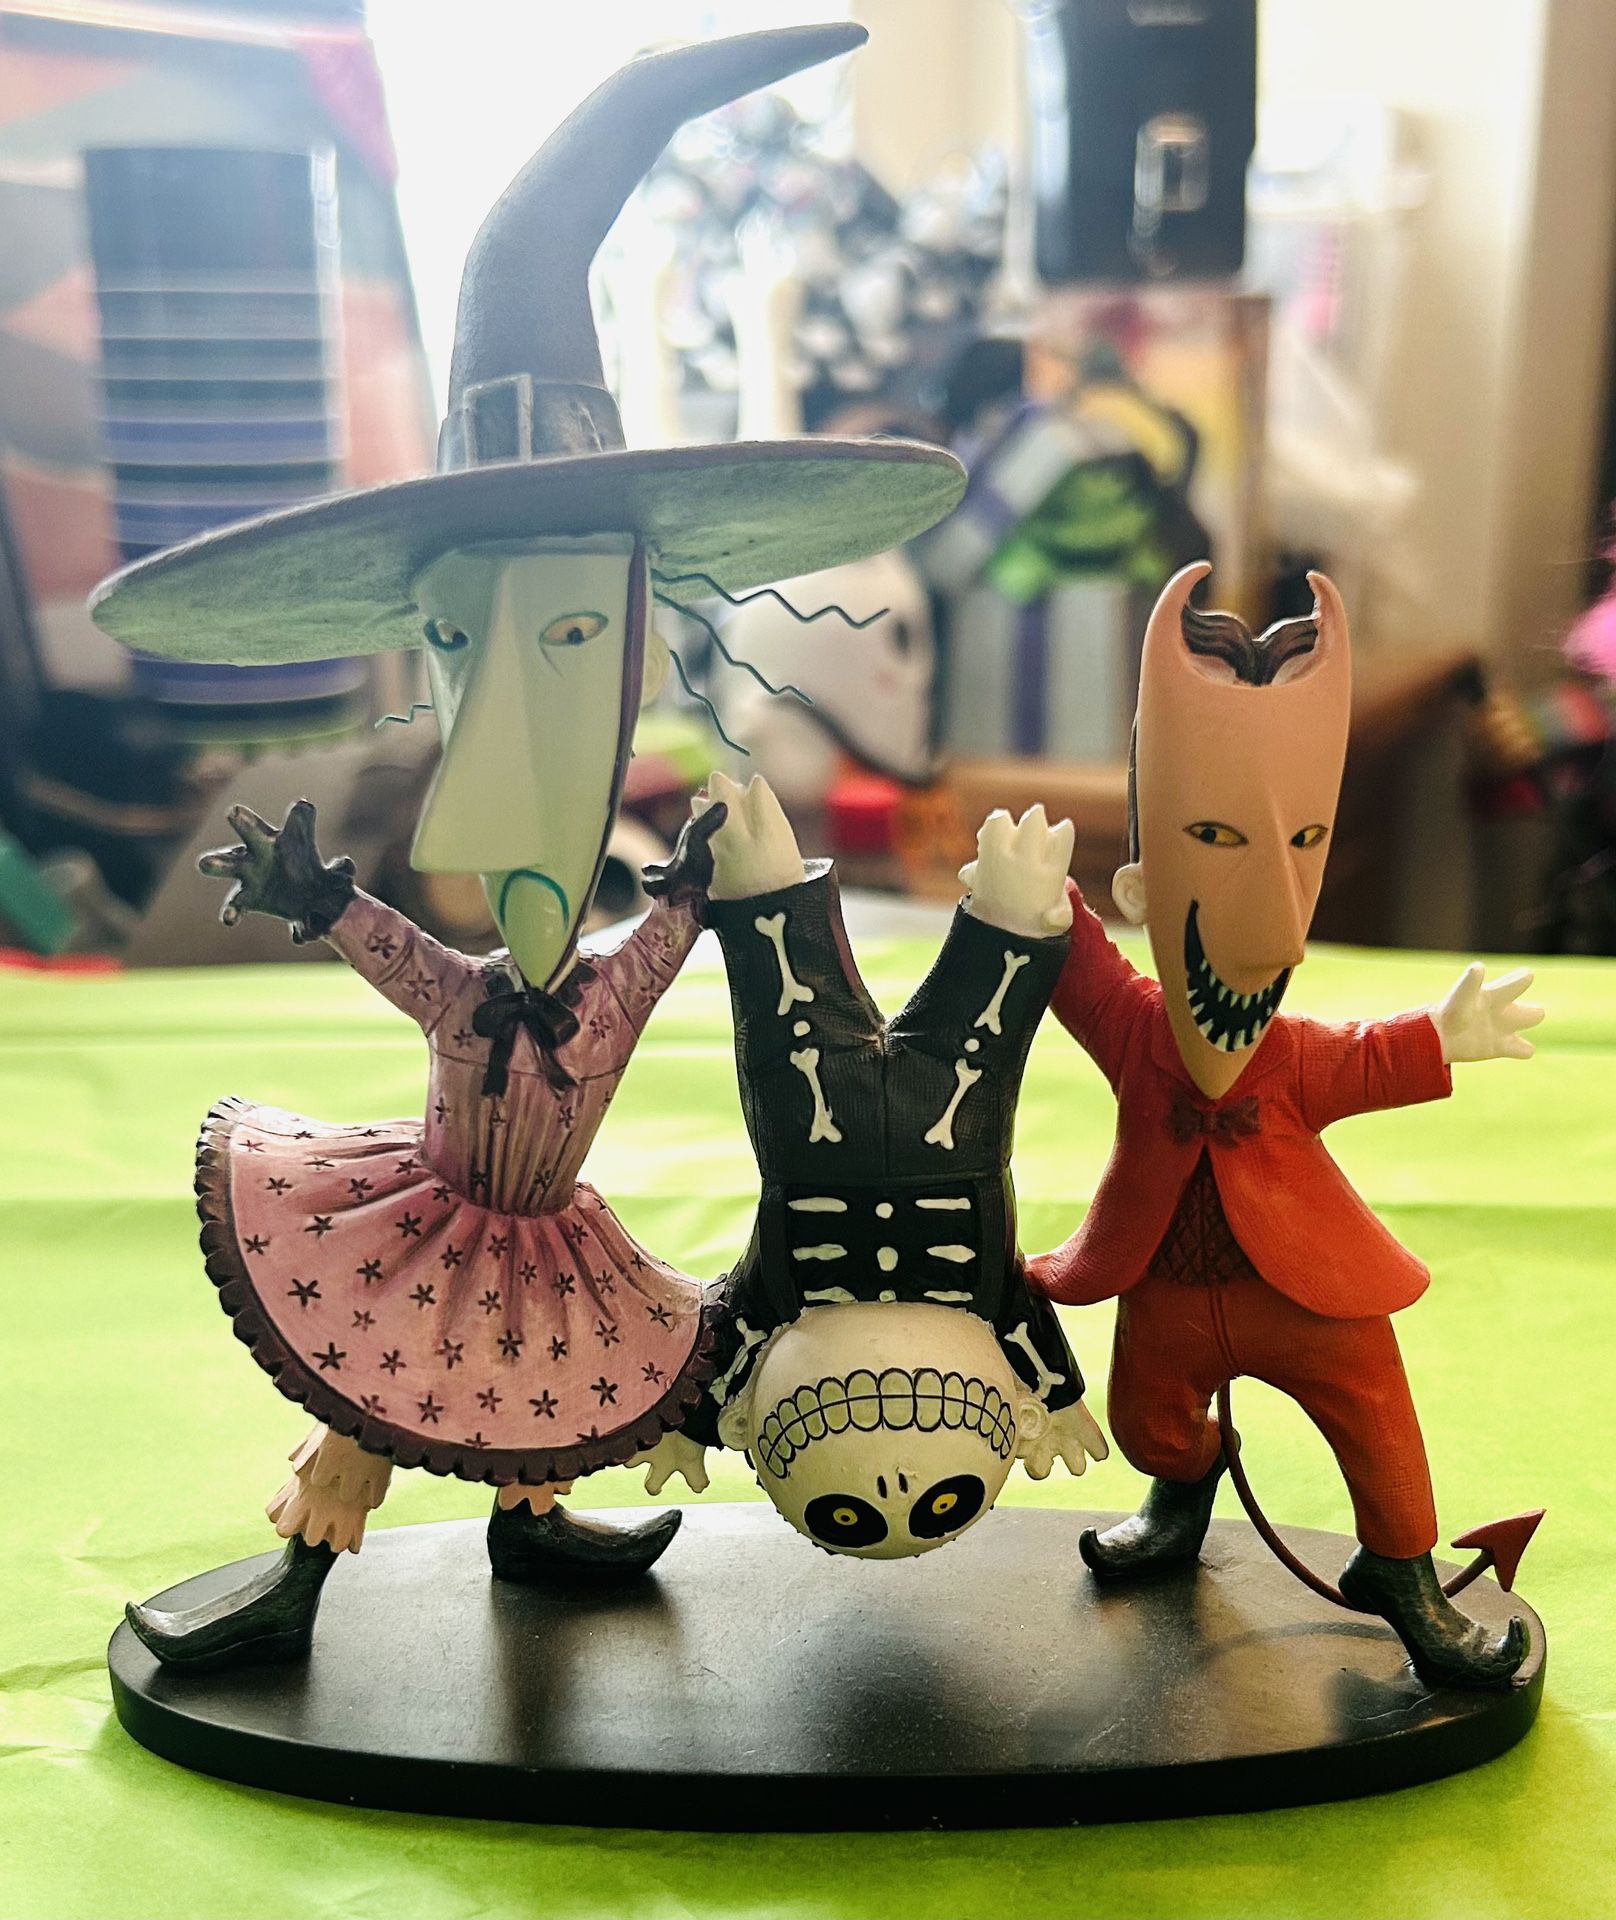 The Nightmare Before Christmas Lock Shock and Barrel Figurine (contact info removed) by Disney Showcase (Retails For $90, See Last Pic)